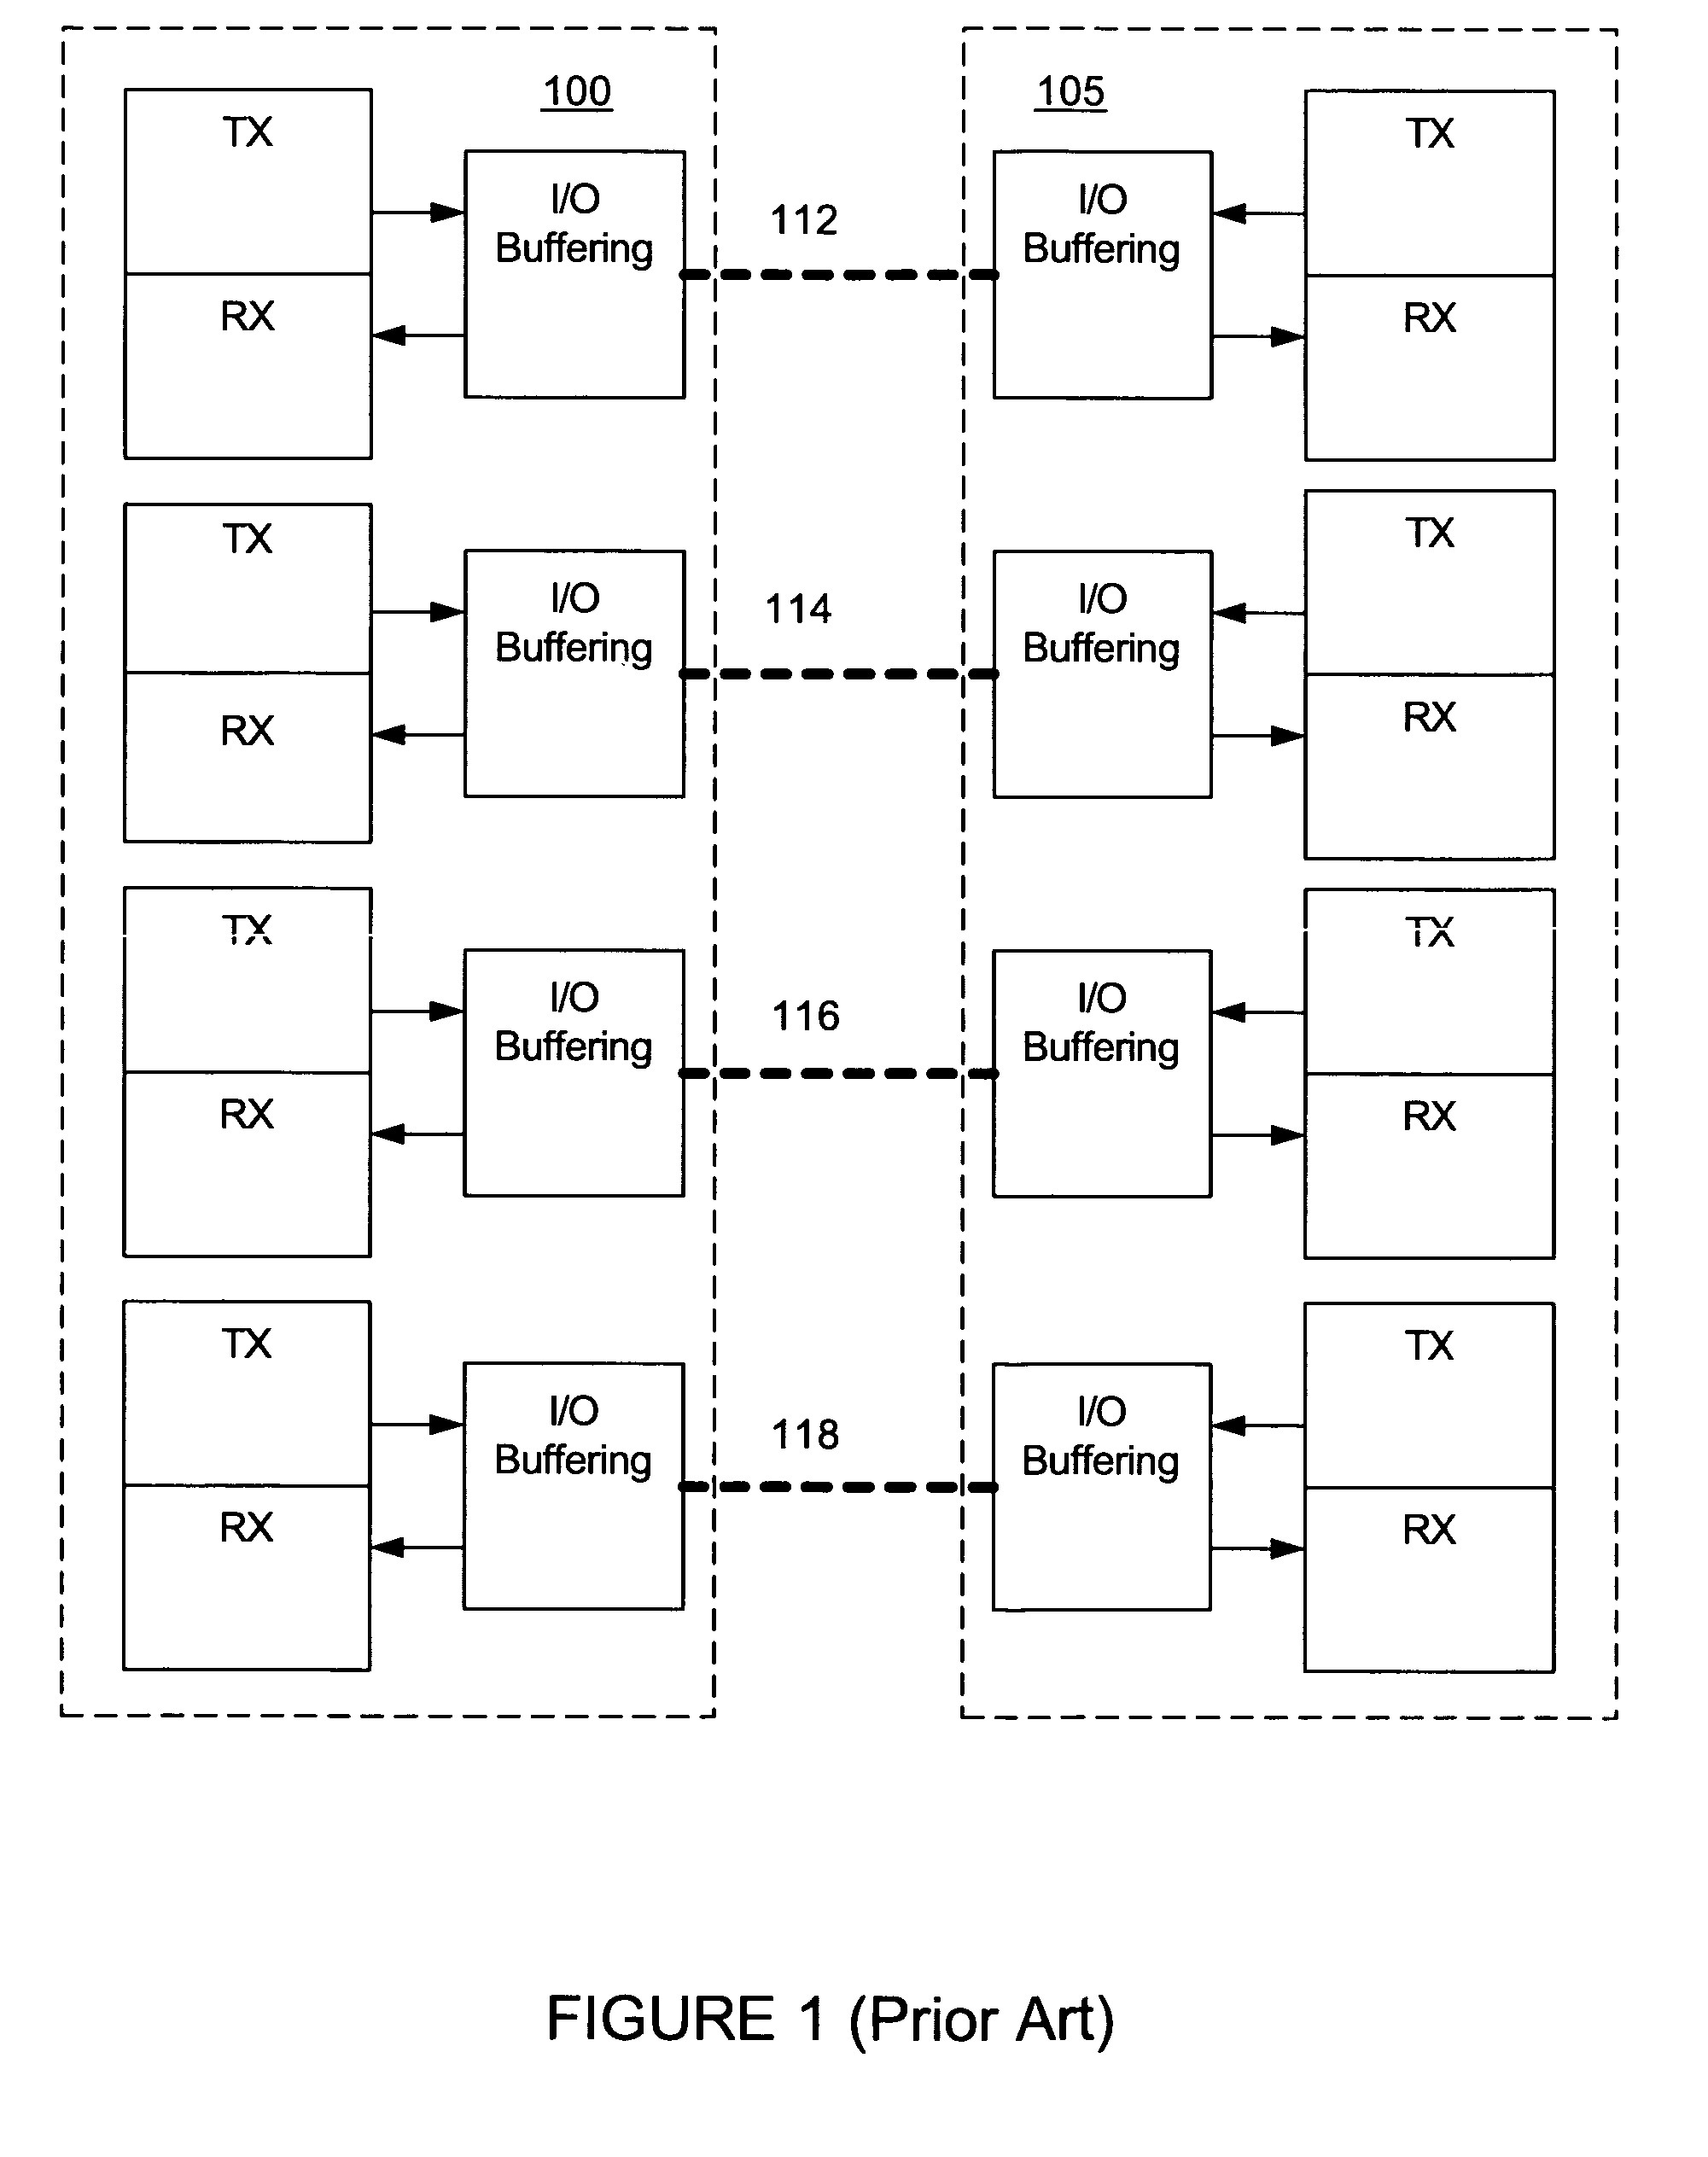 Auto-sequencing transmission speed of a data port